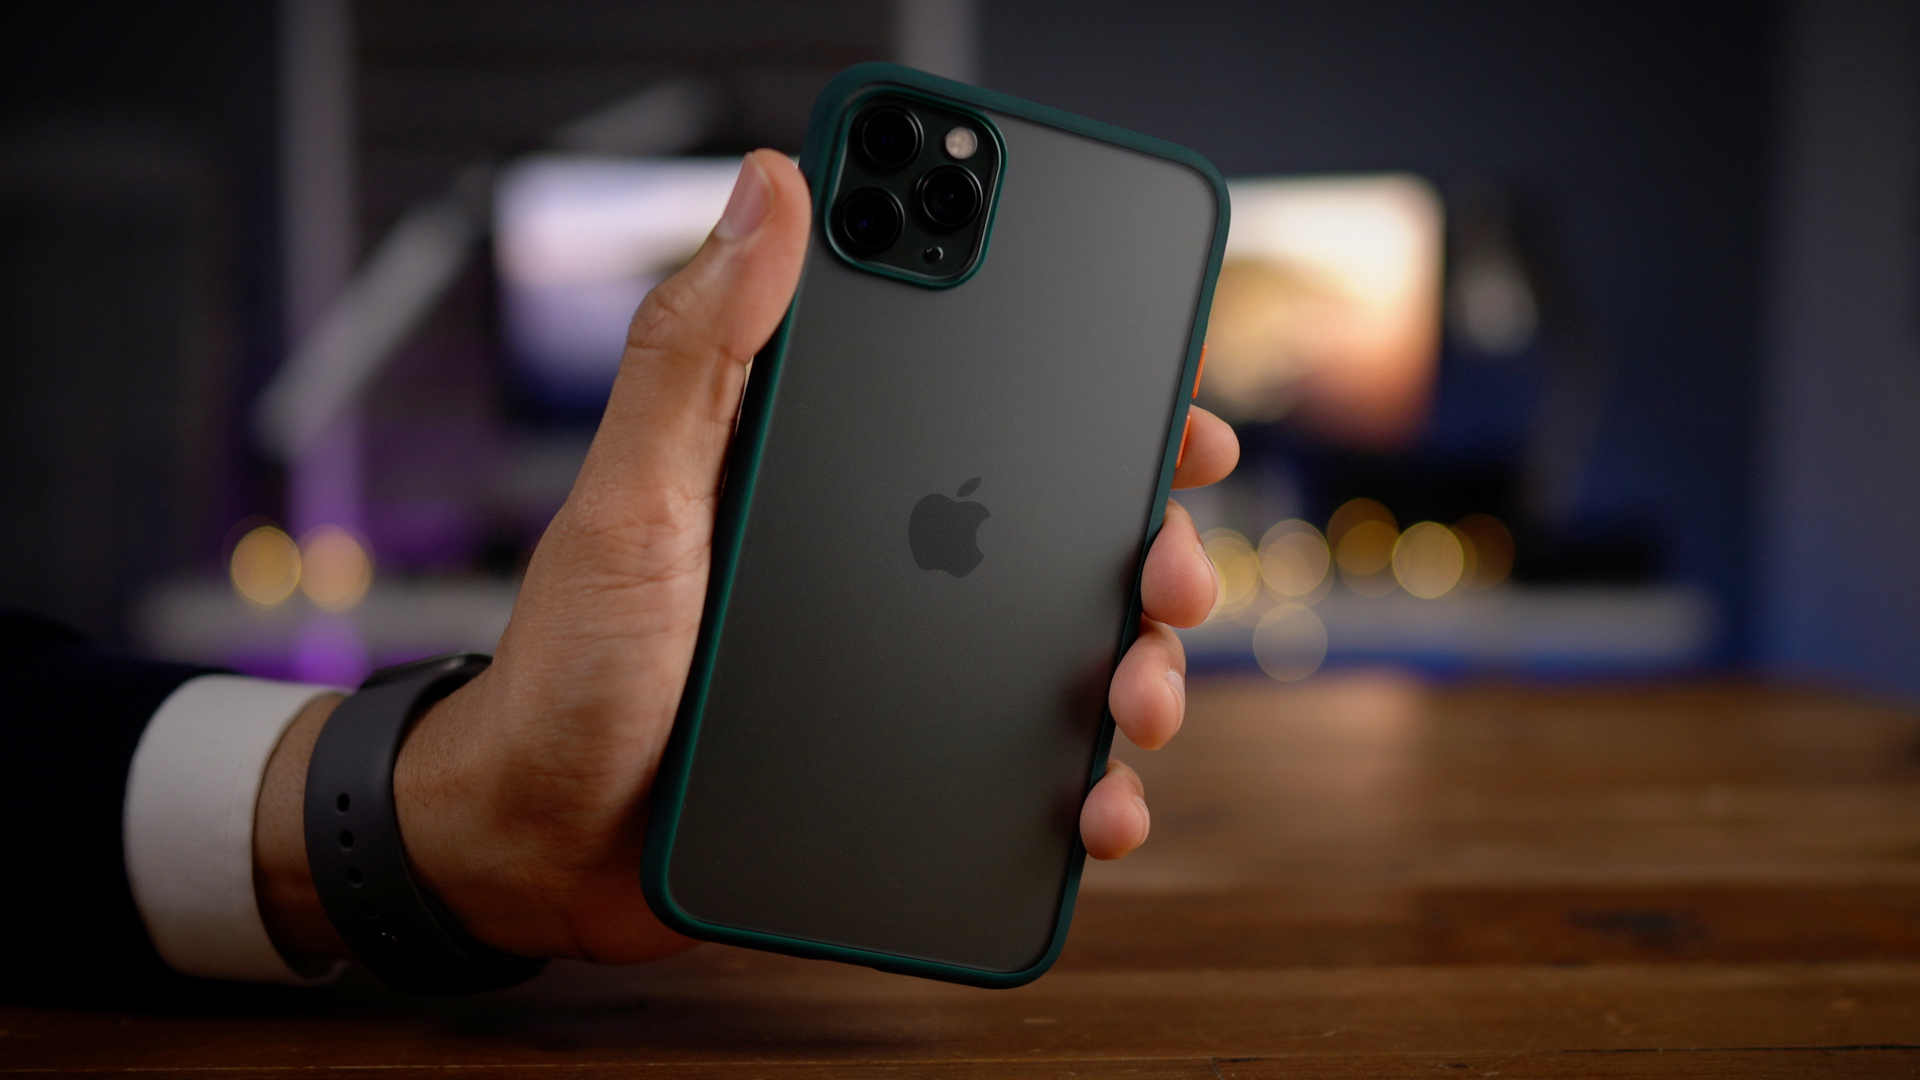 Cases for iPhone 11 from Bare in our early Black Friday sale